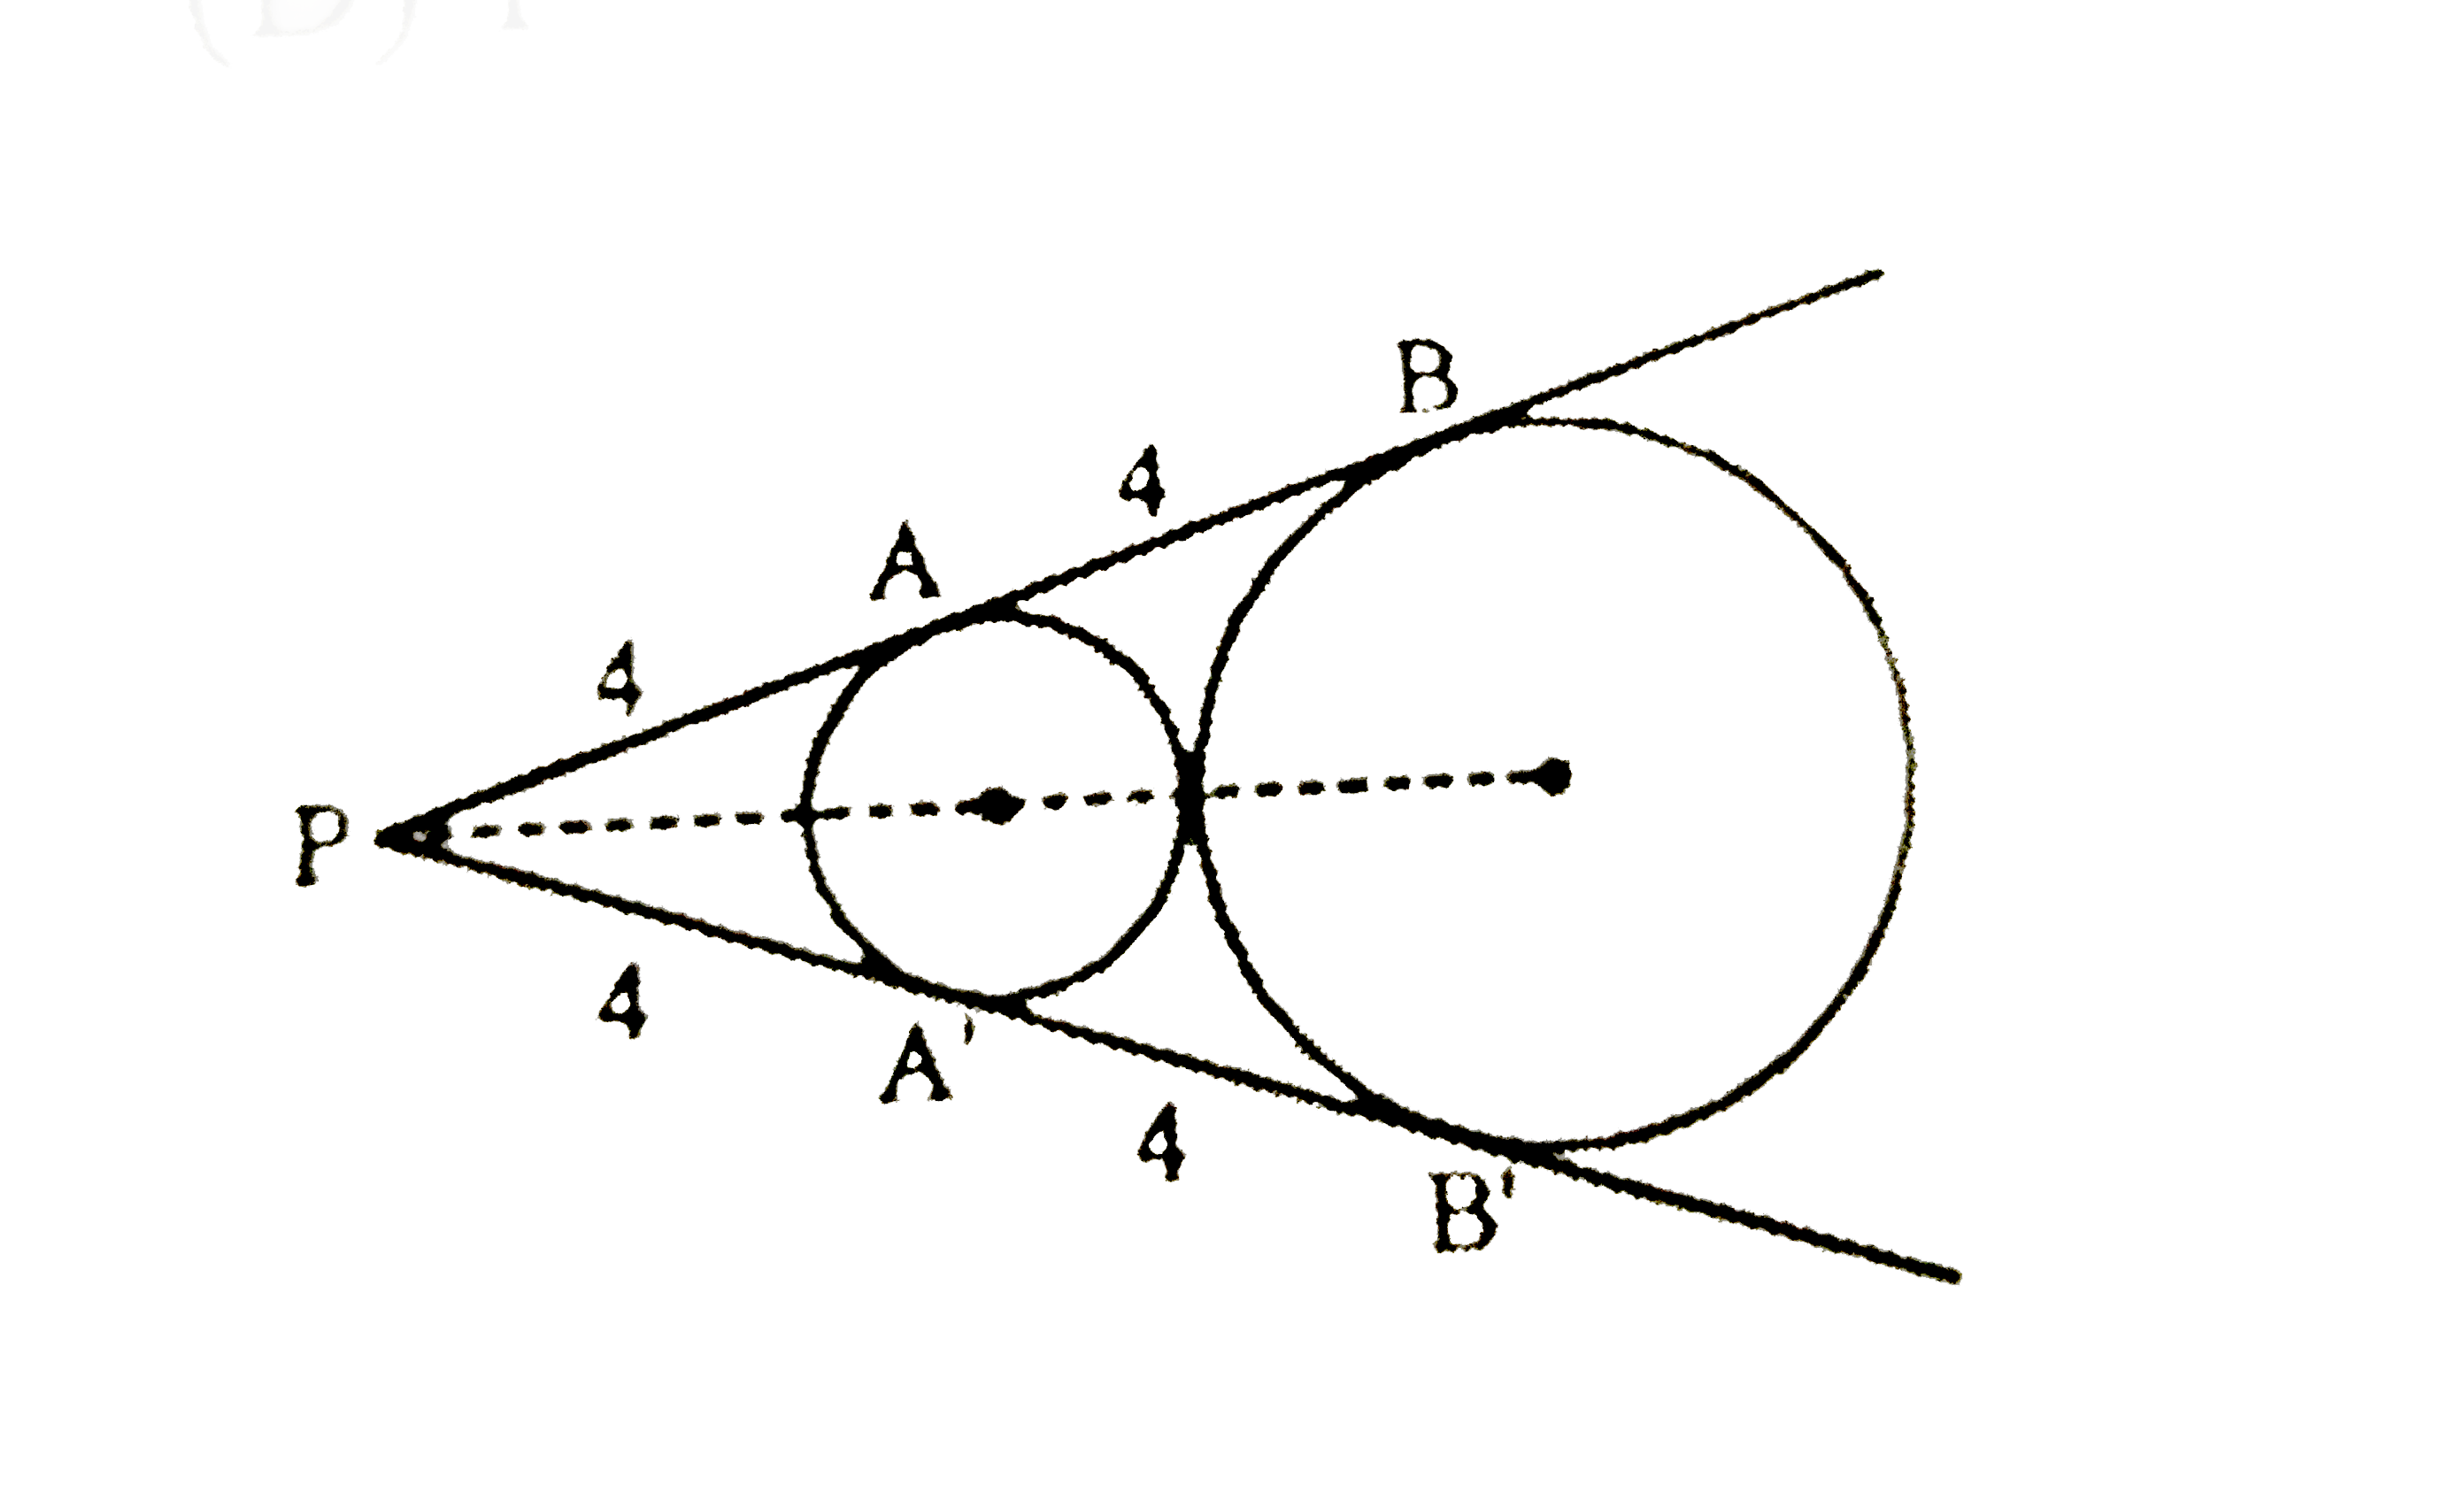 Two circles are externally tangent. Lines PAB and PA'B' are common tangents with A and A' on the smaller circle and B' and B' on the larger circle. If PA = AB = 4, then area of the smaller circle, is